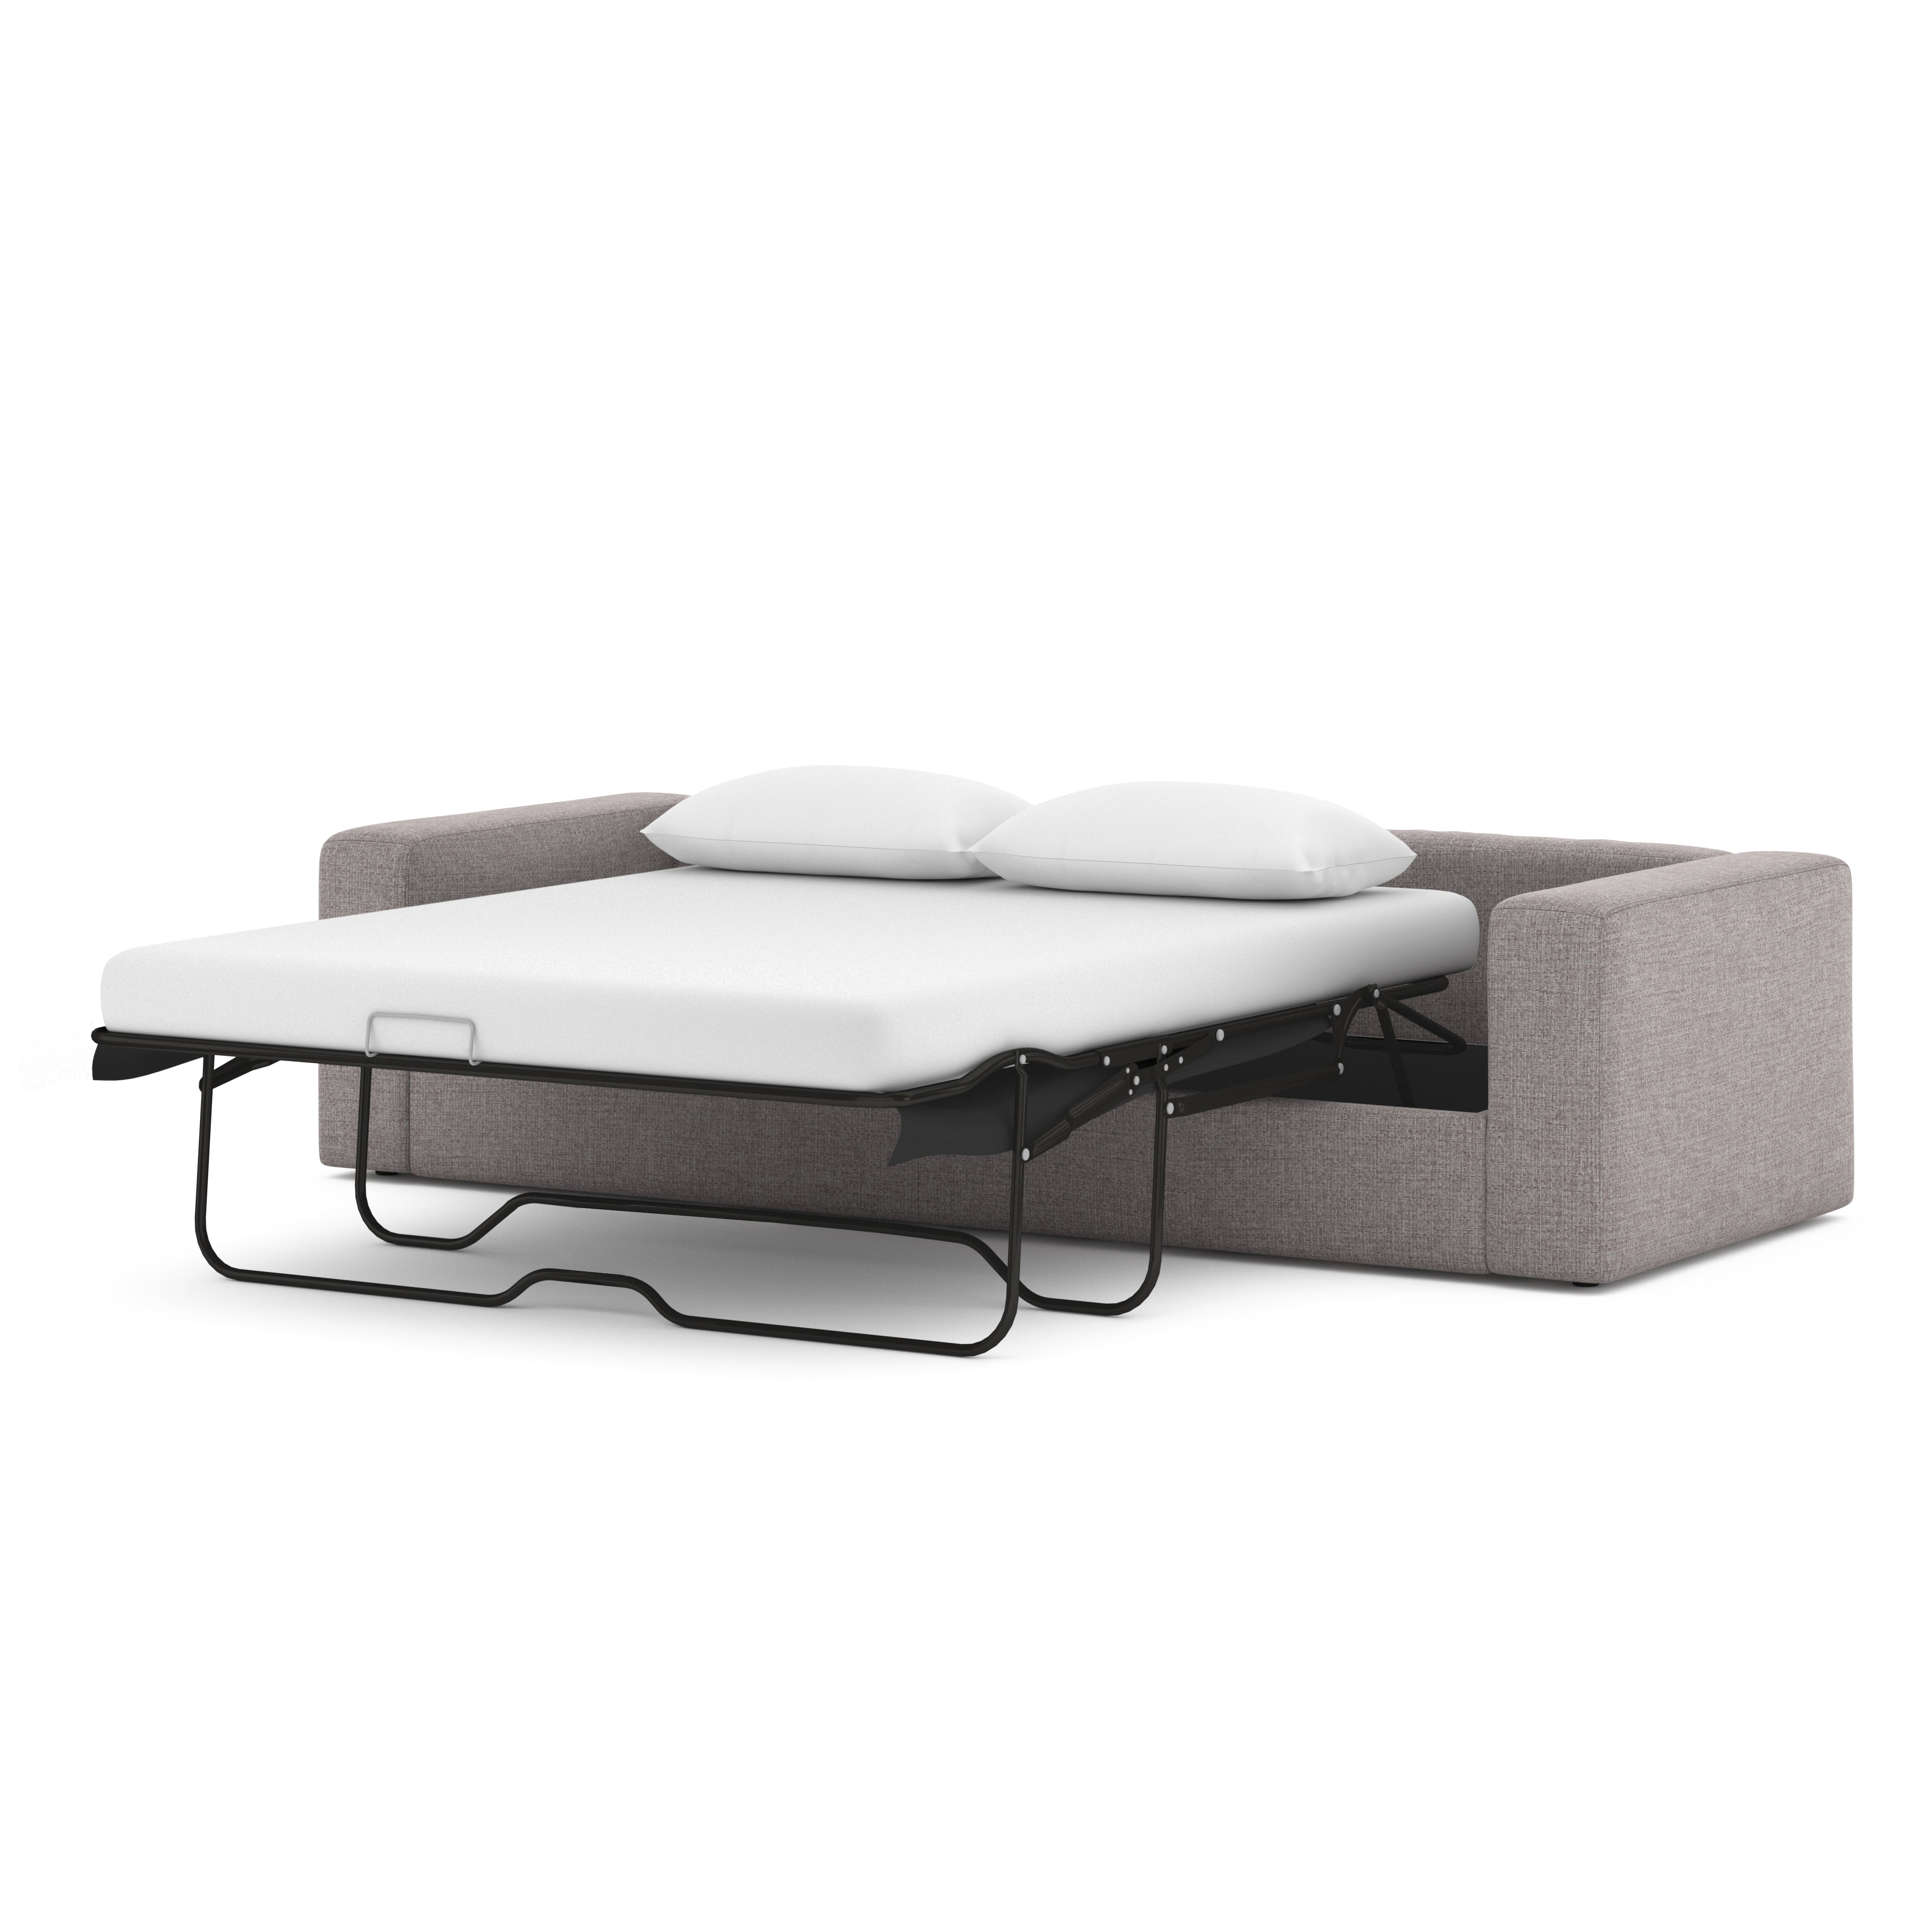 Blaire Sofa Bed